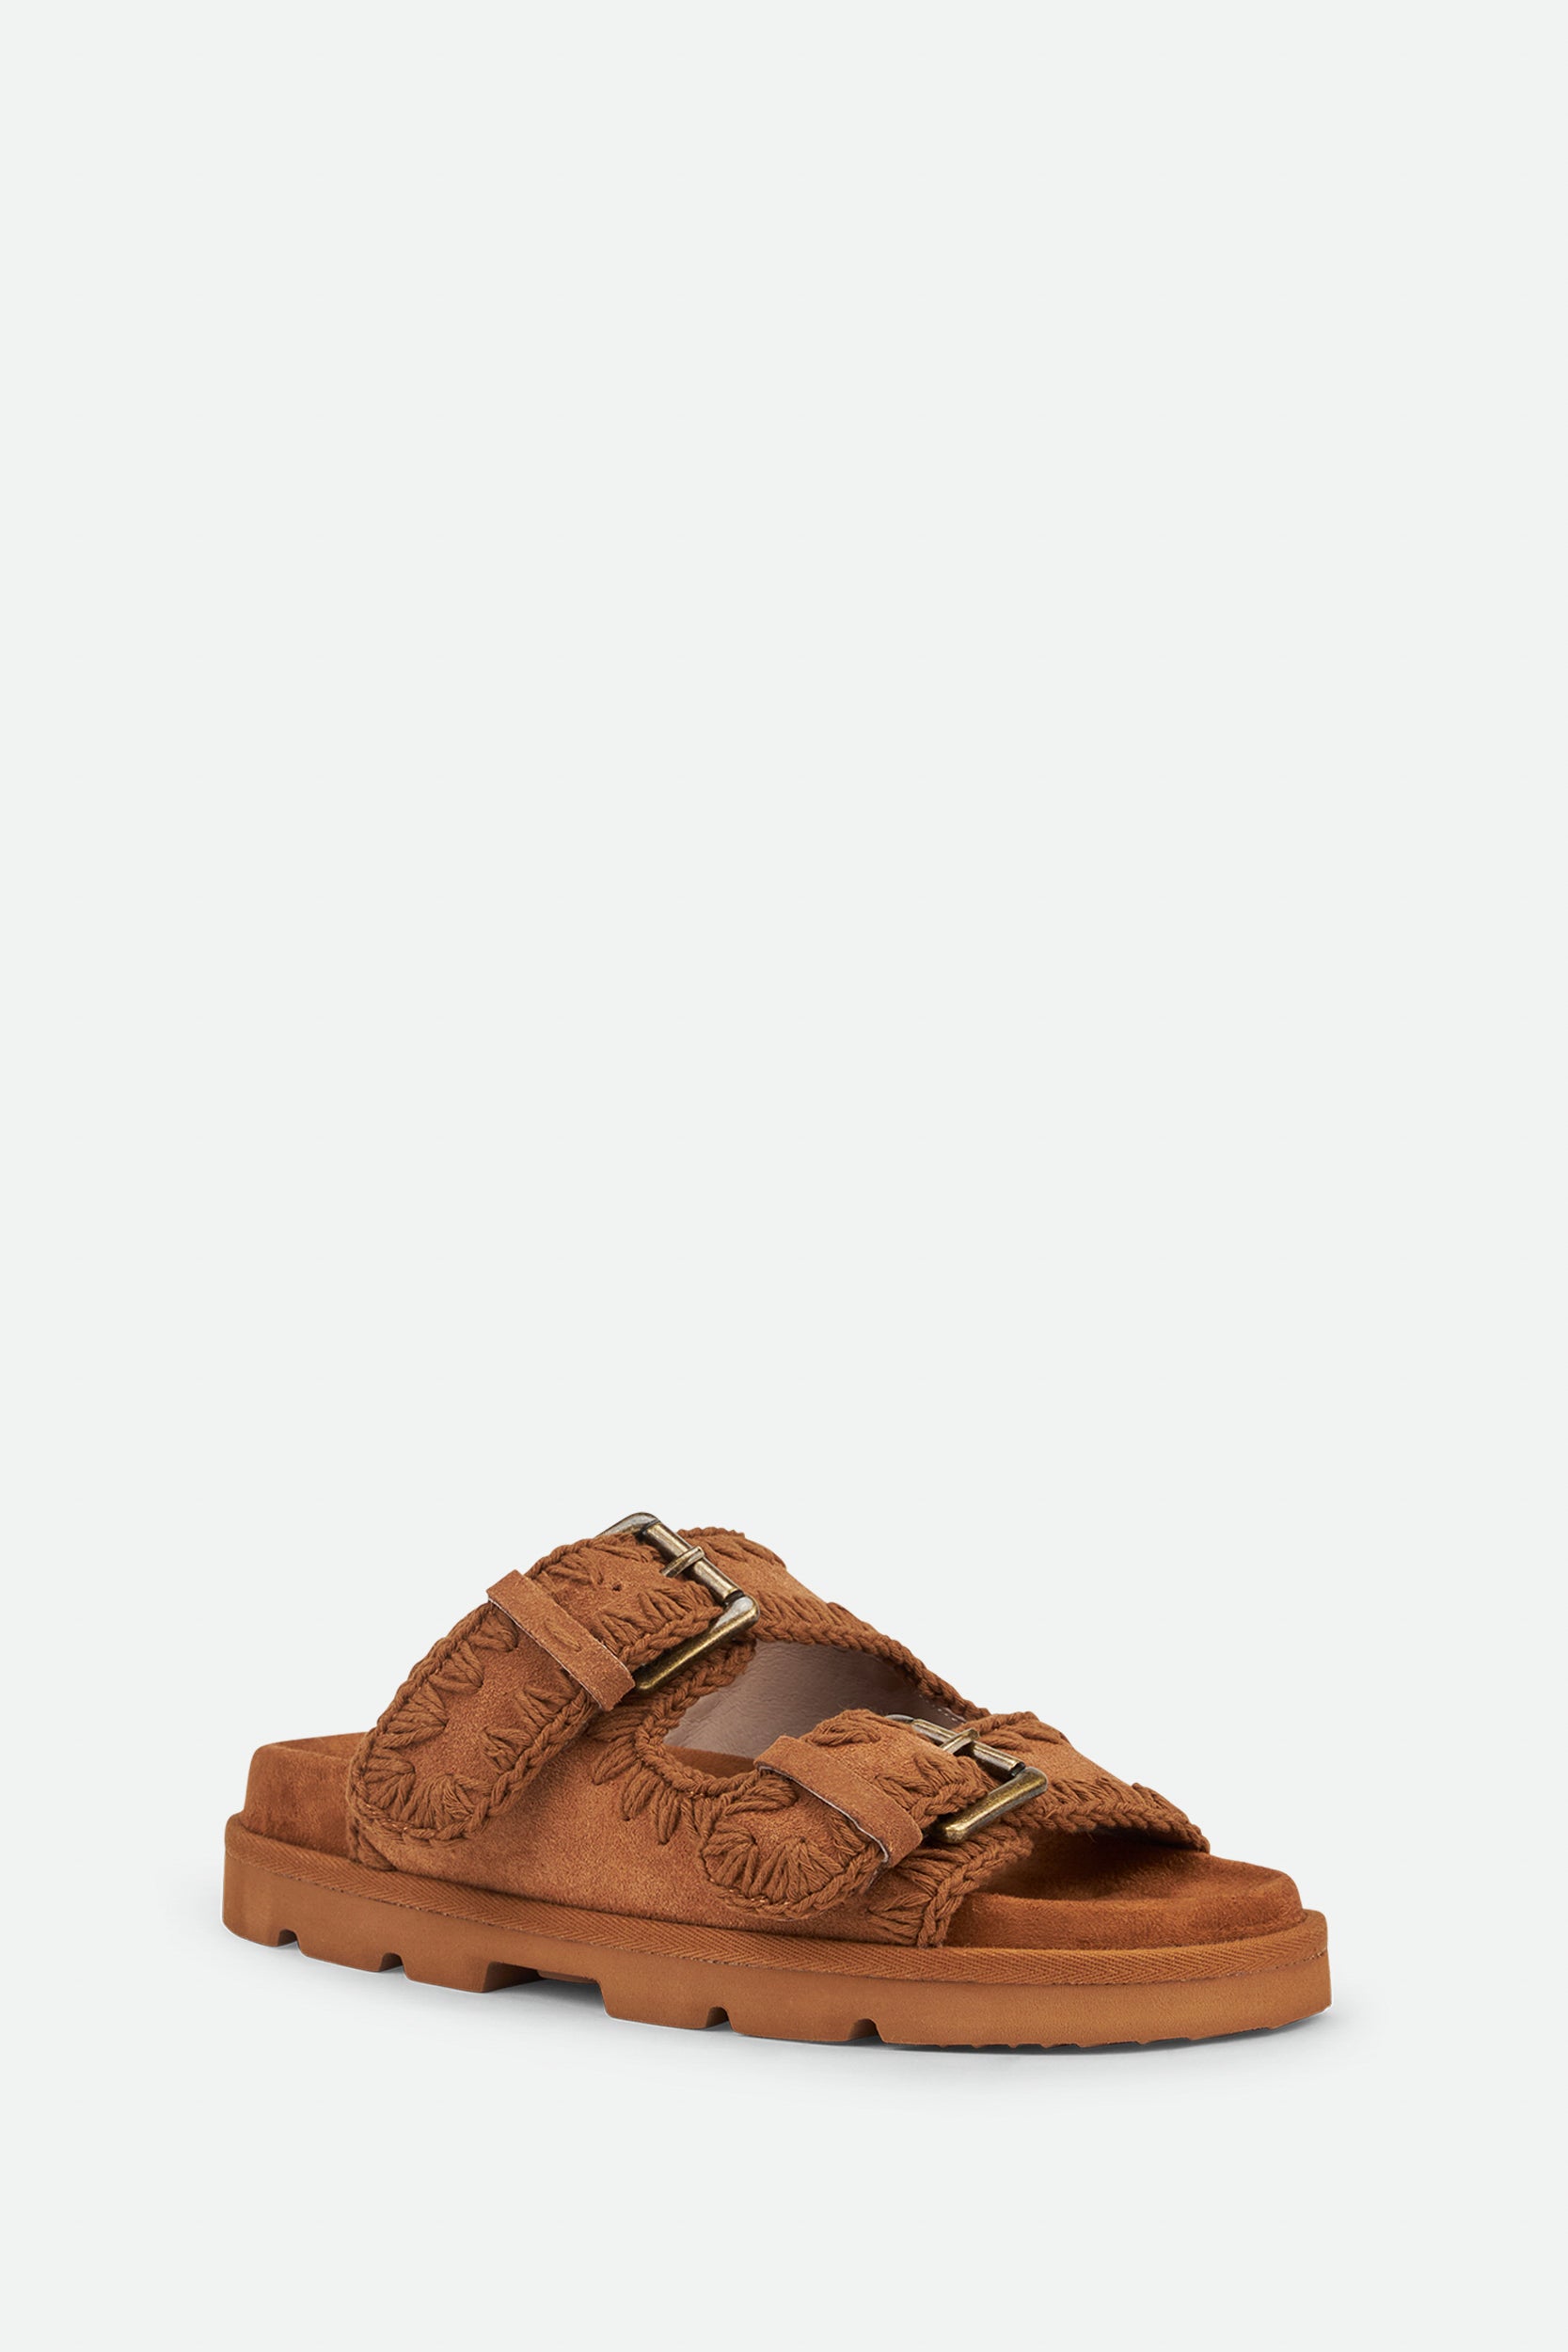 Mou Brown Suede Sandals